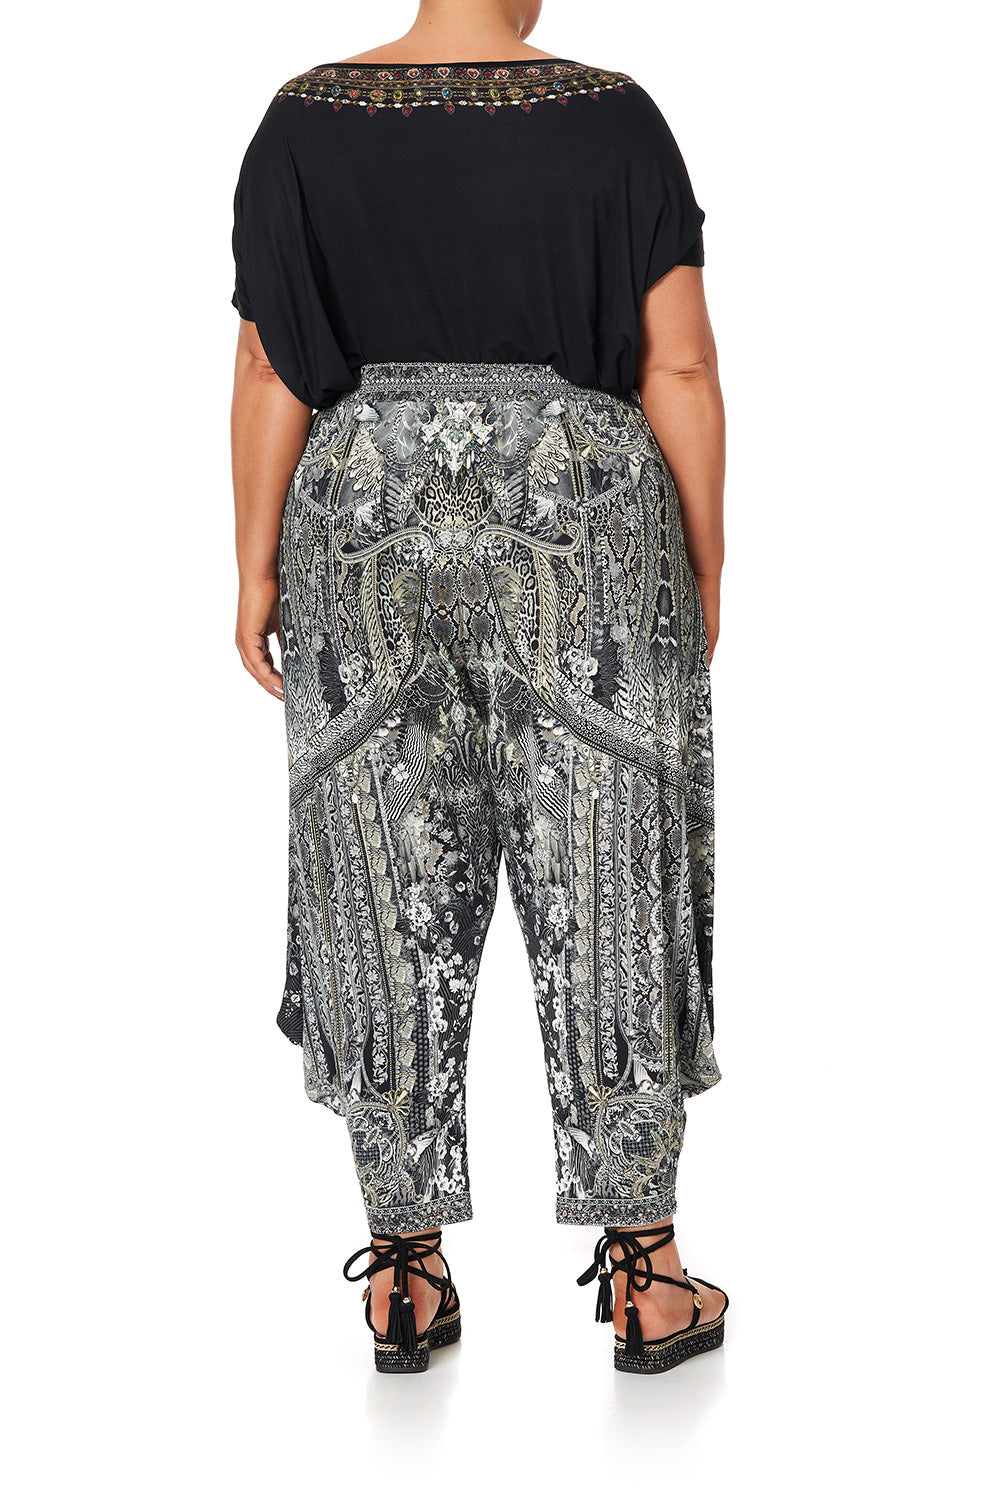 JERSEY DRAPE PANT WITH POCKET ONE TRIBE